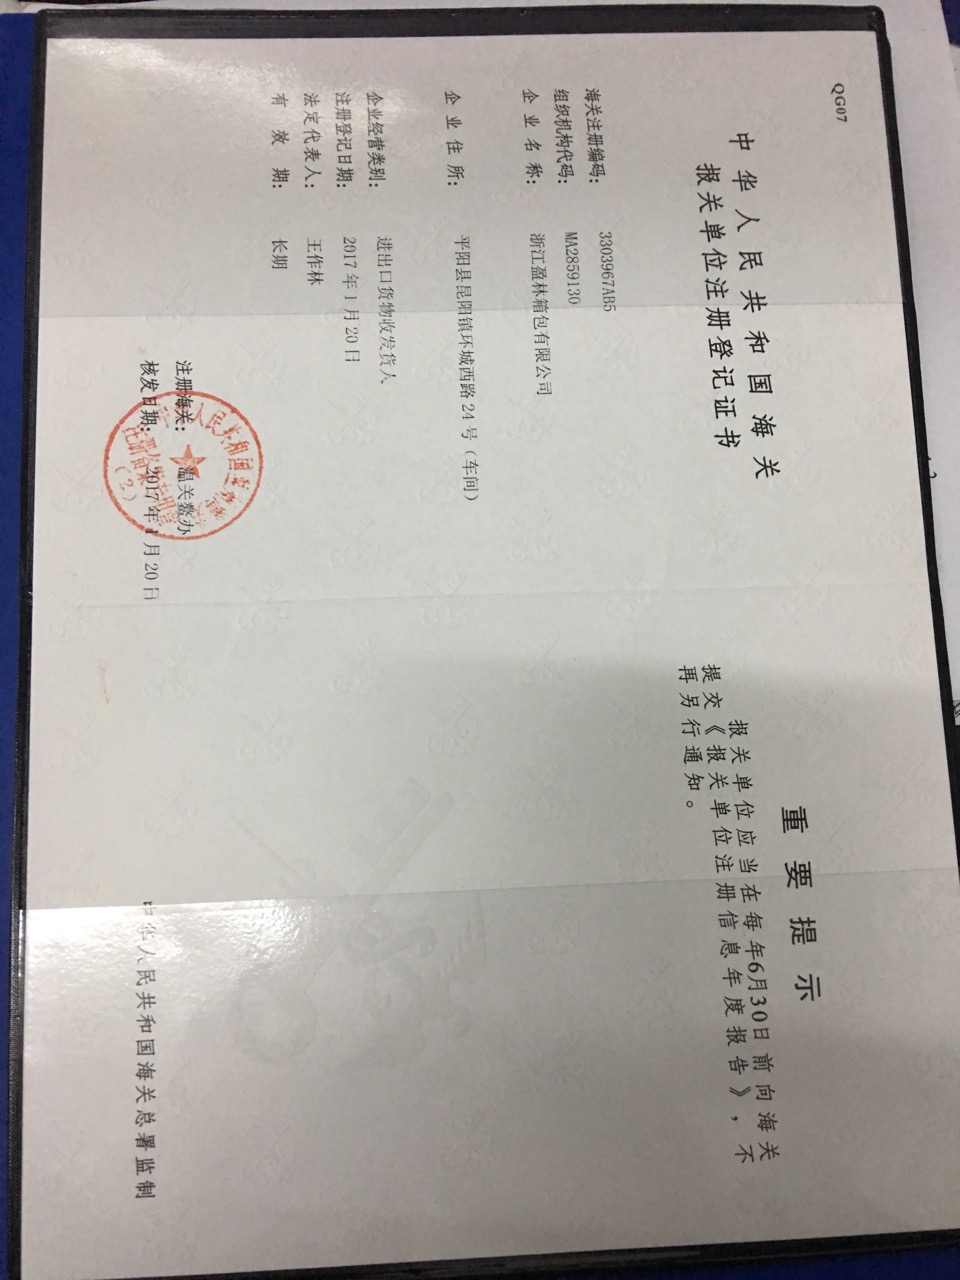 Registration certificate of the Customs declaration agency of the People's Republic of China  